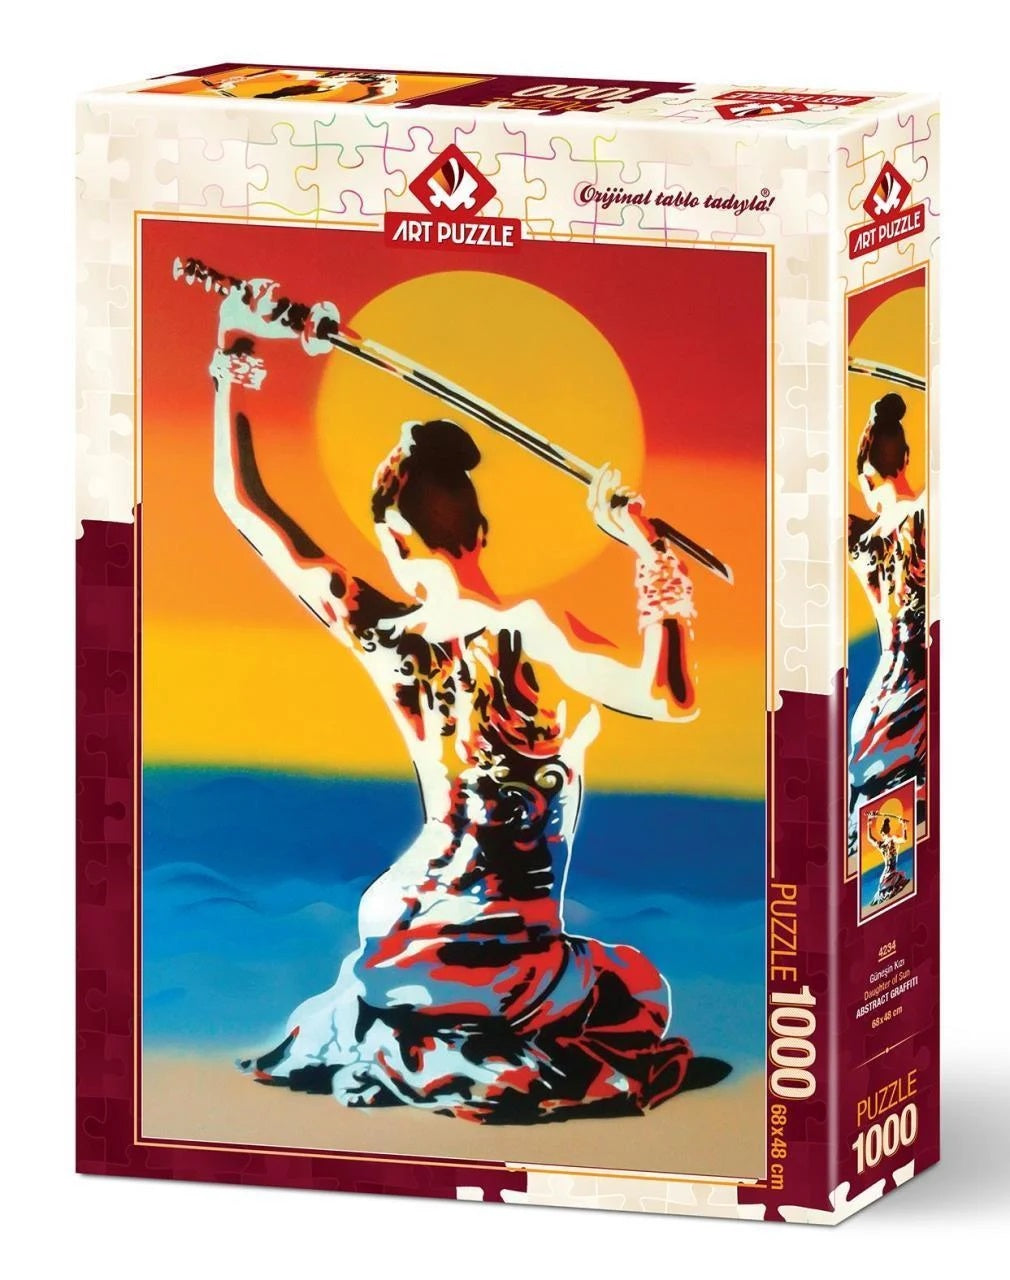 Daughter of Sun by Abstract Graffiti, 1000 Piece Puzzle